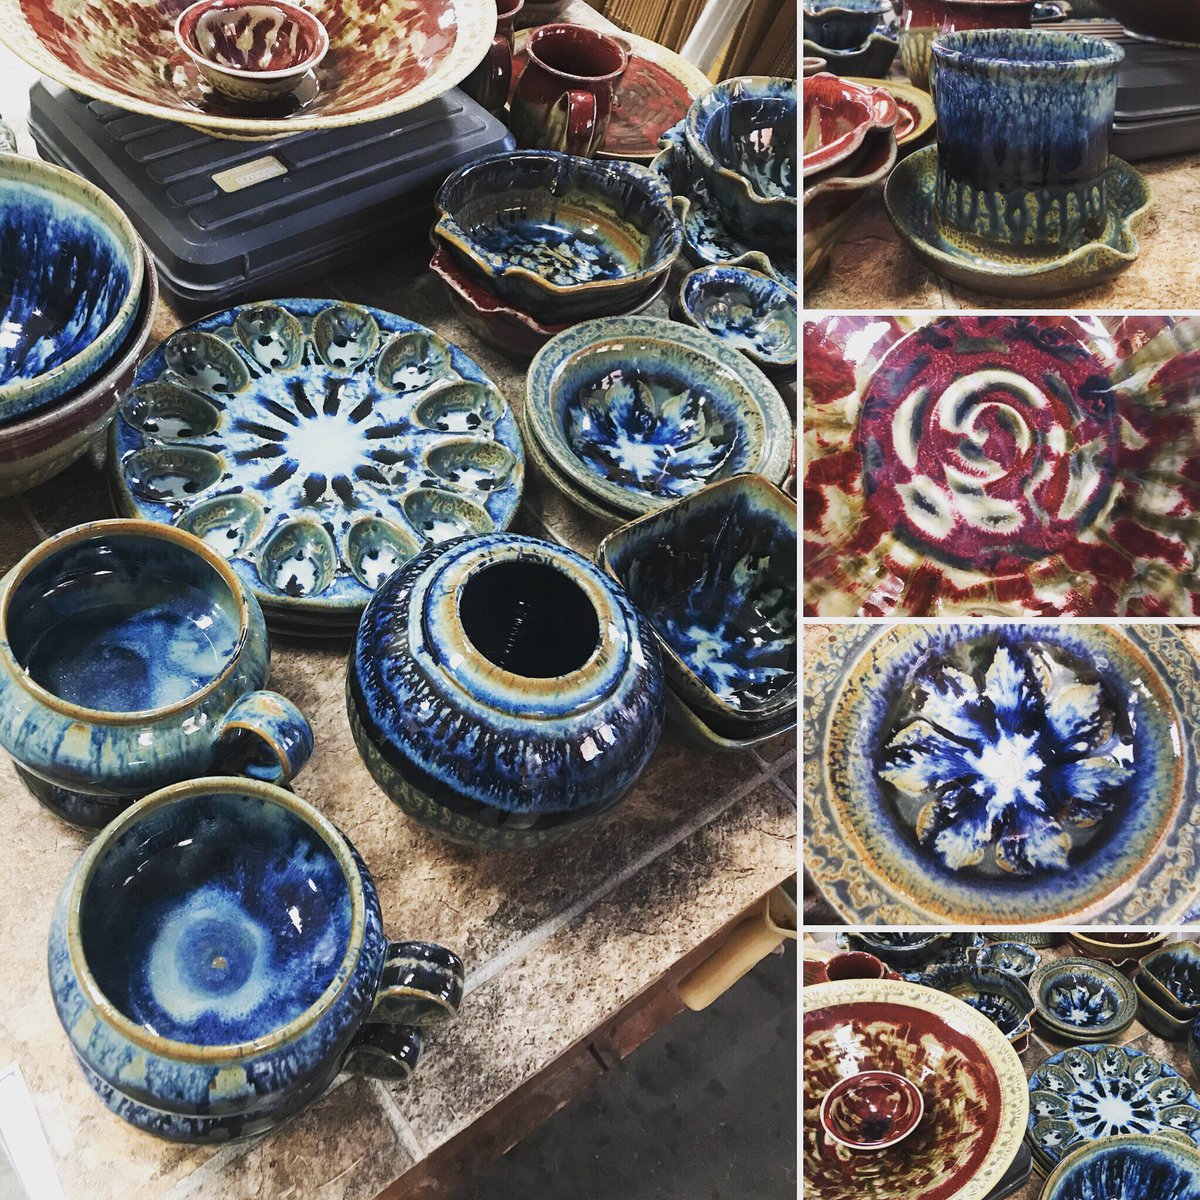 January blues (and reds)? We’re celebrating this cold Minnesota day w/ HOT new pottery from #RayPottery from NC! #newinthegallery #claycoyotegallery #handmadepottery #seagrovenc #ashglaze #justunpacked #bluepottery #clayeggtray #baconcooker #redwhiteandblue #gemtones #redpottery